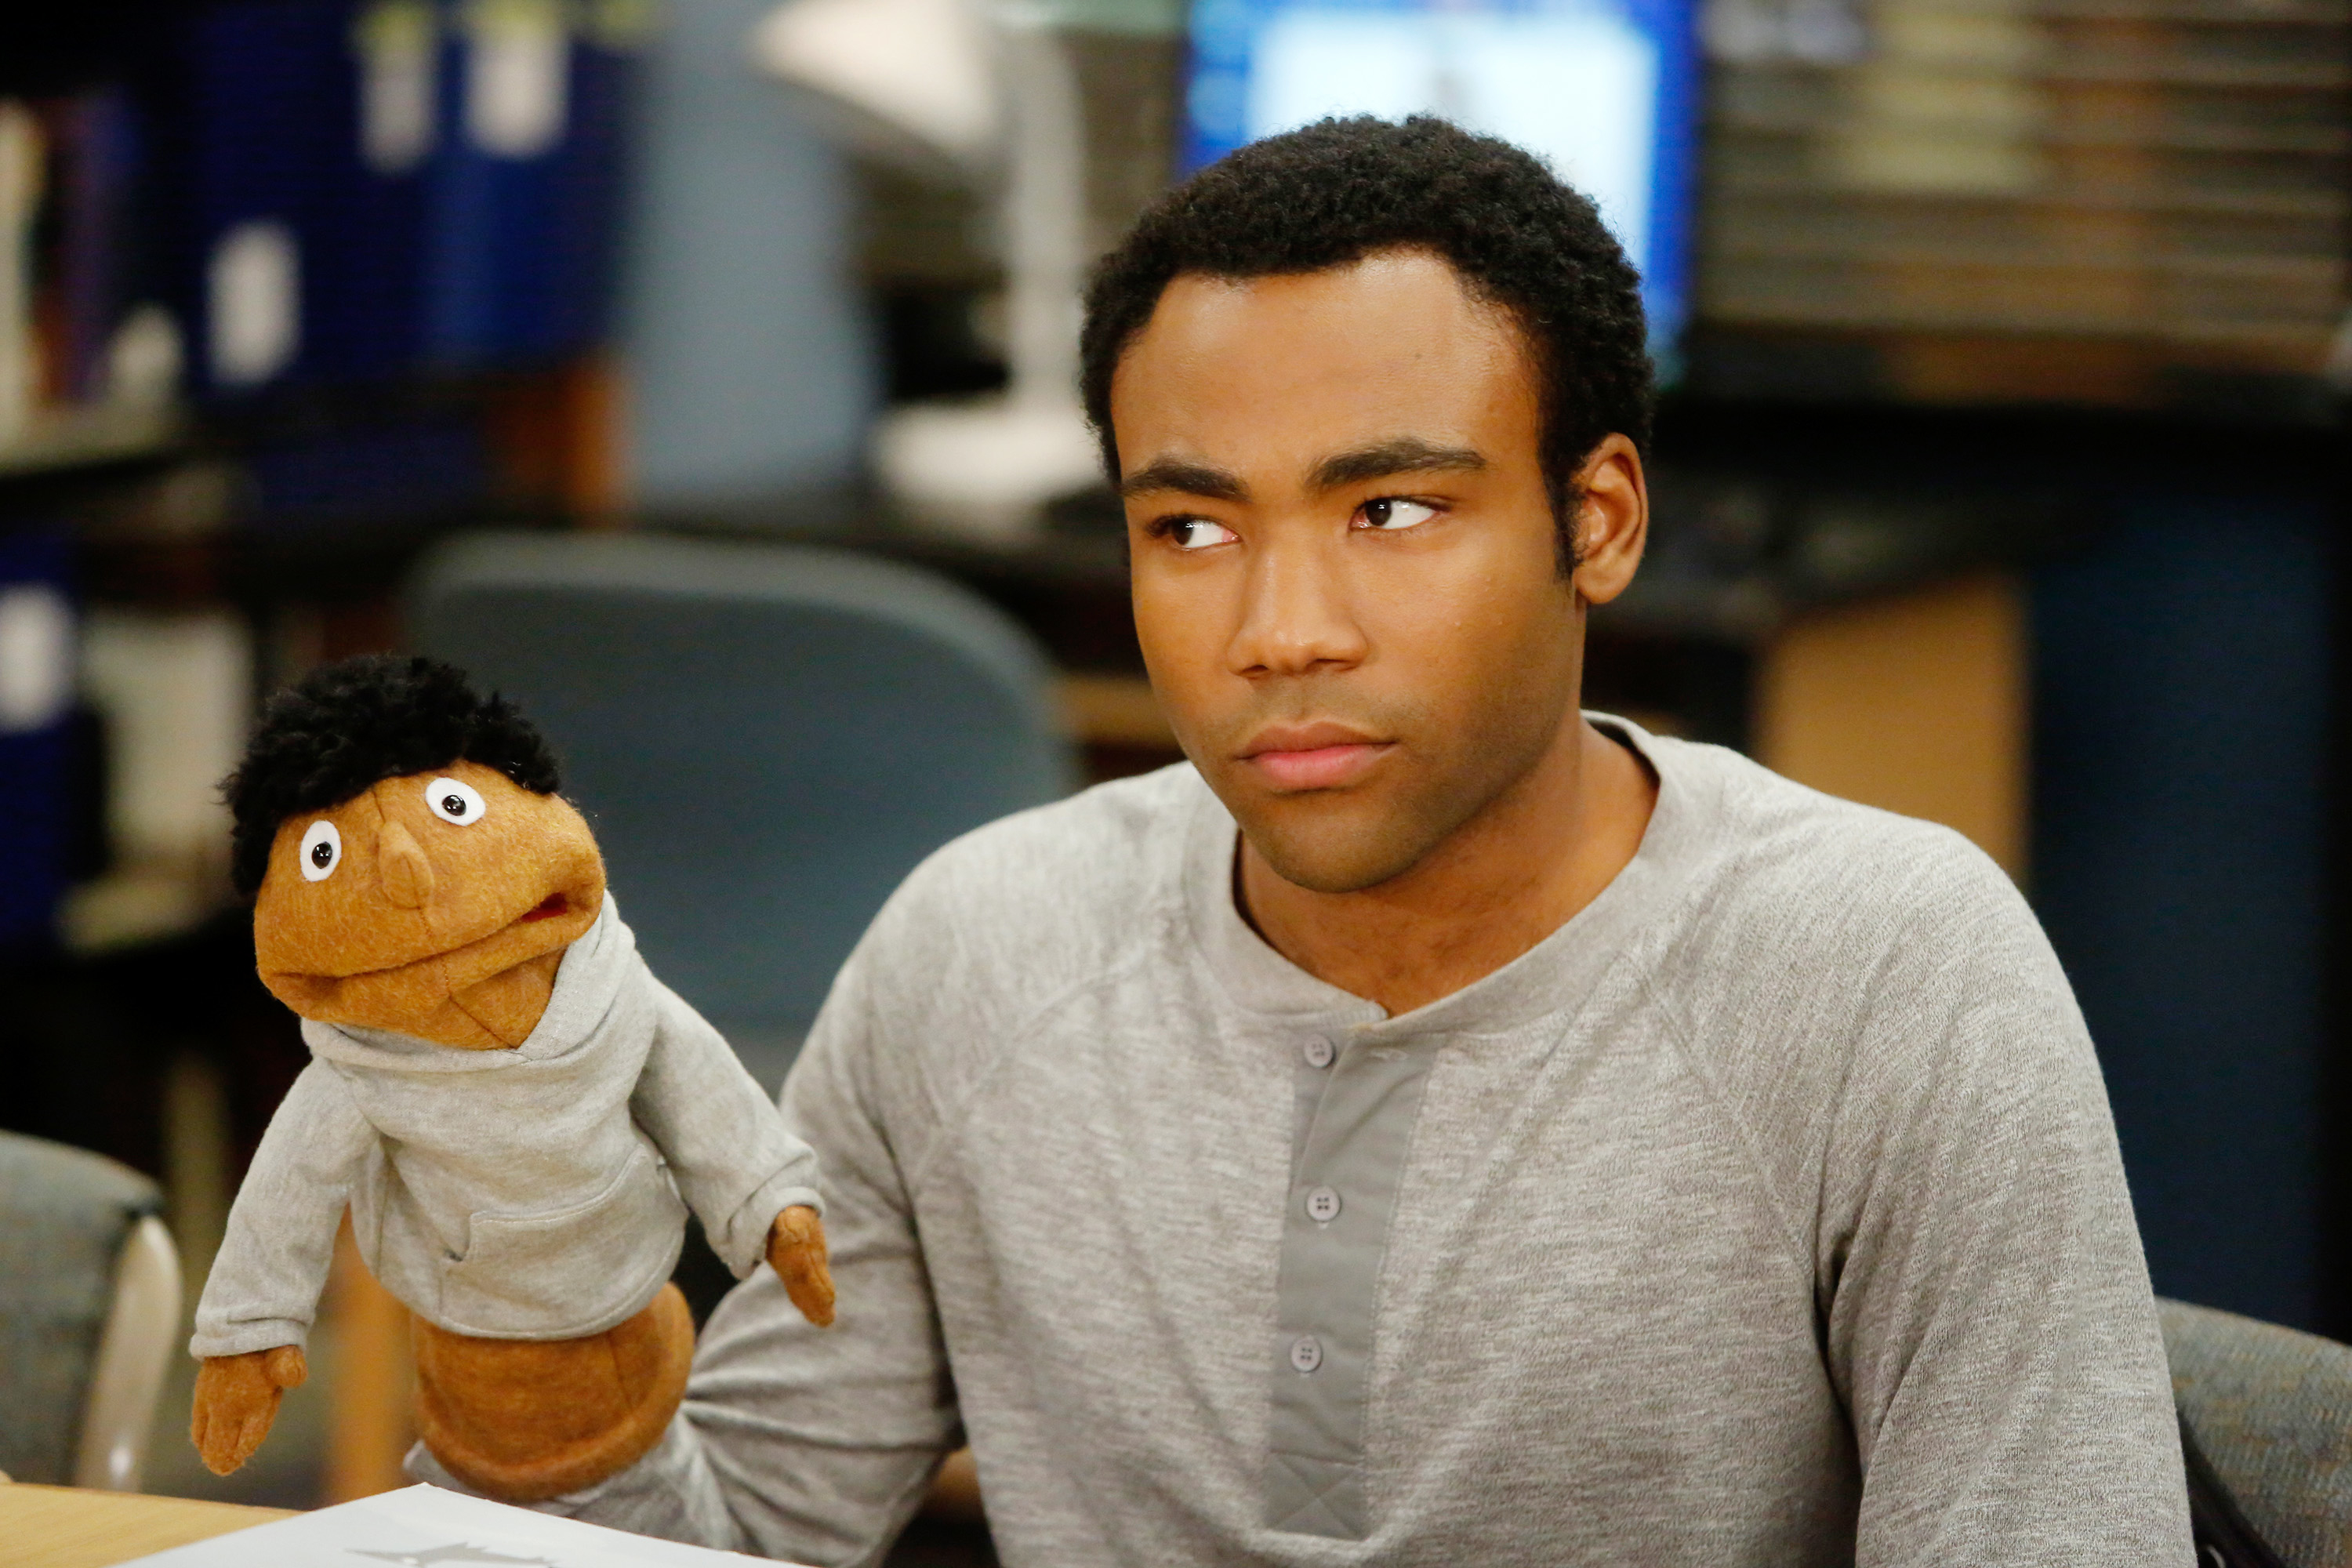 Actor with puppet resembling him on TV show set. He wears a casual grey shirt and looks thoughtful